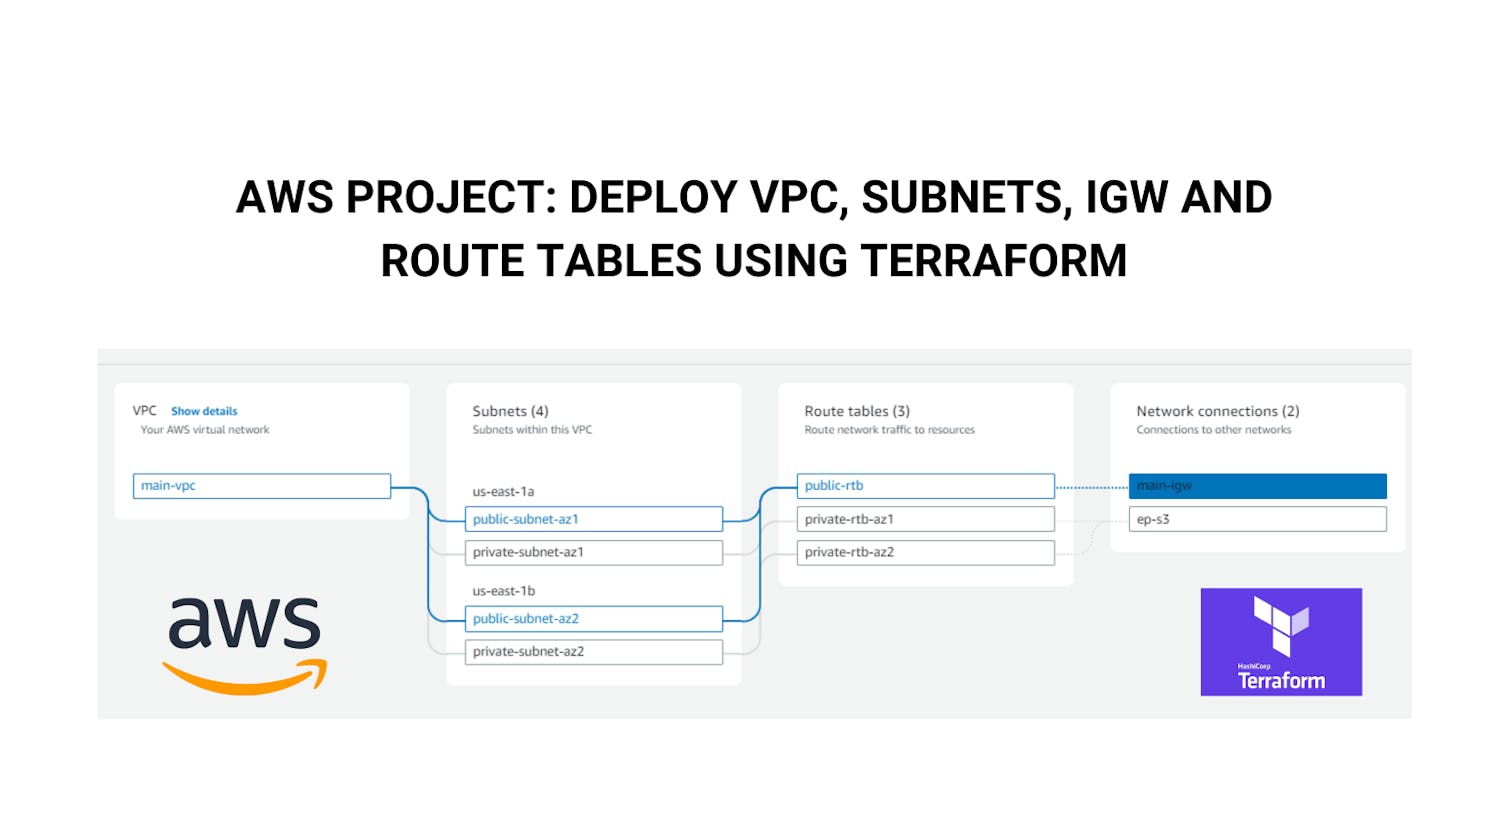 AWS Project: Deploy VPC, Subnets, IGW and Route Tables using Terraform